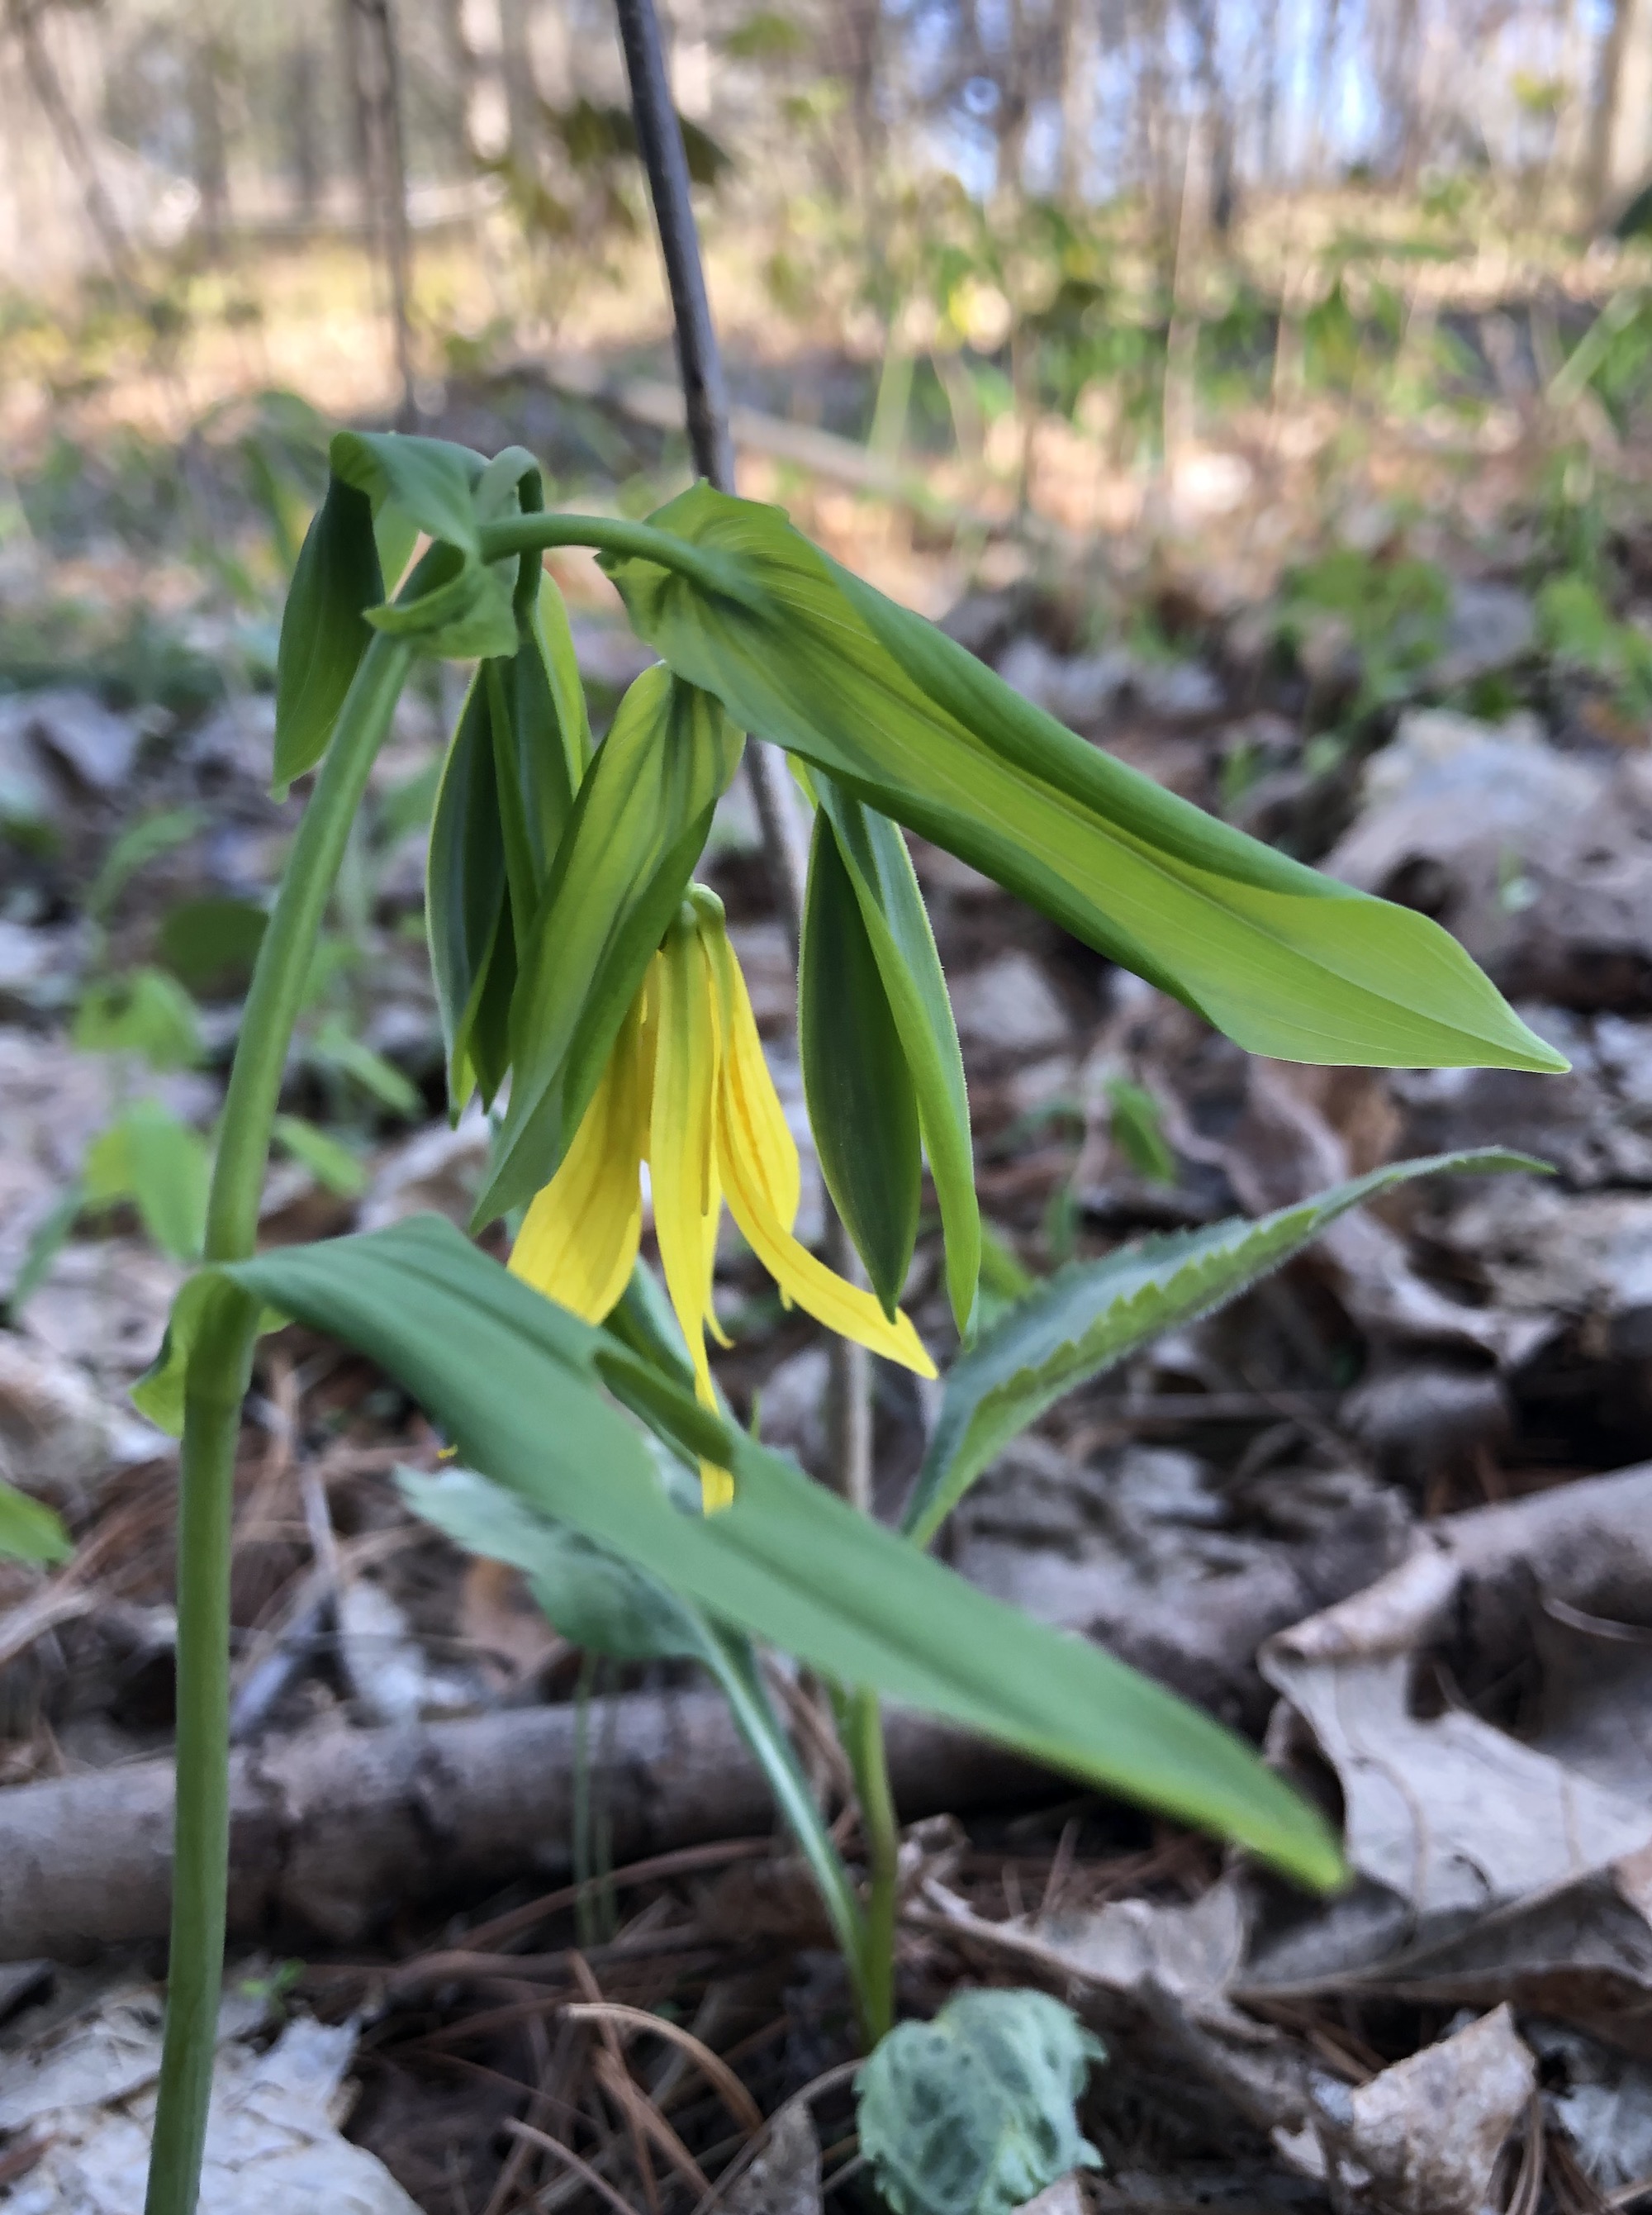 Bellwort in the Maple-Basswood Forest of the University of Wisconsin Arboretum in Madison, Wisconsin on April 30, 2020.